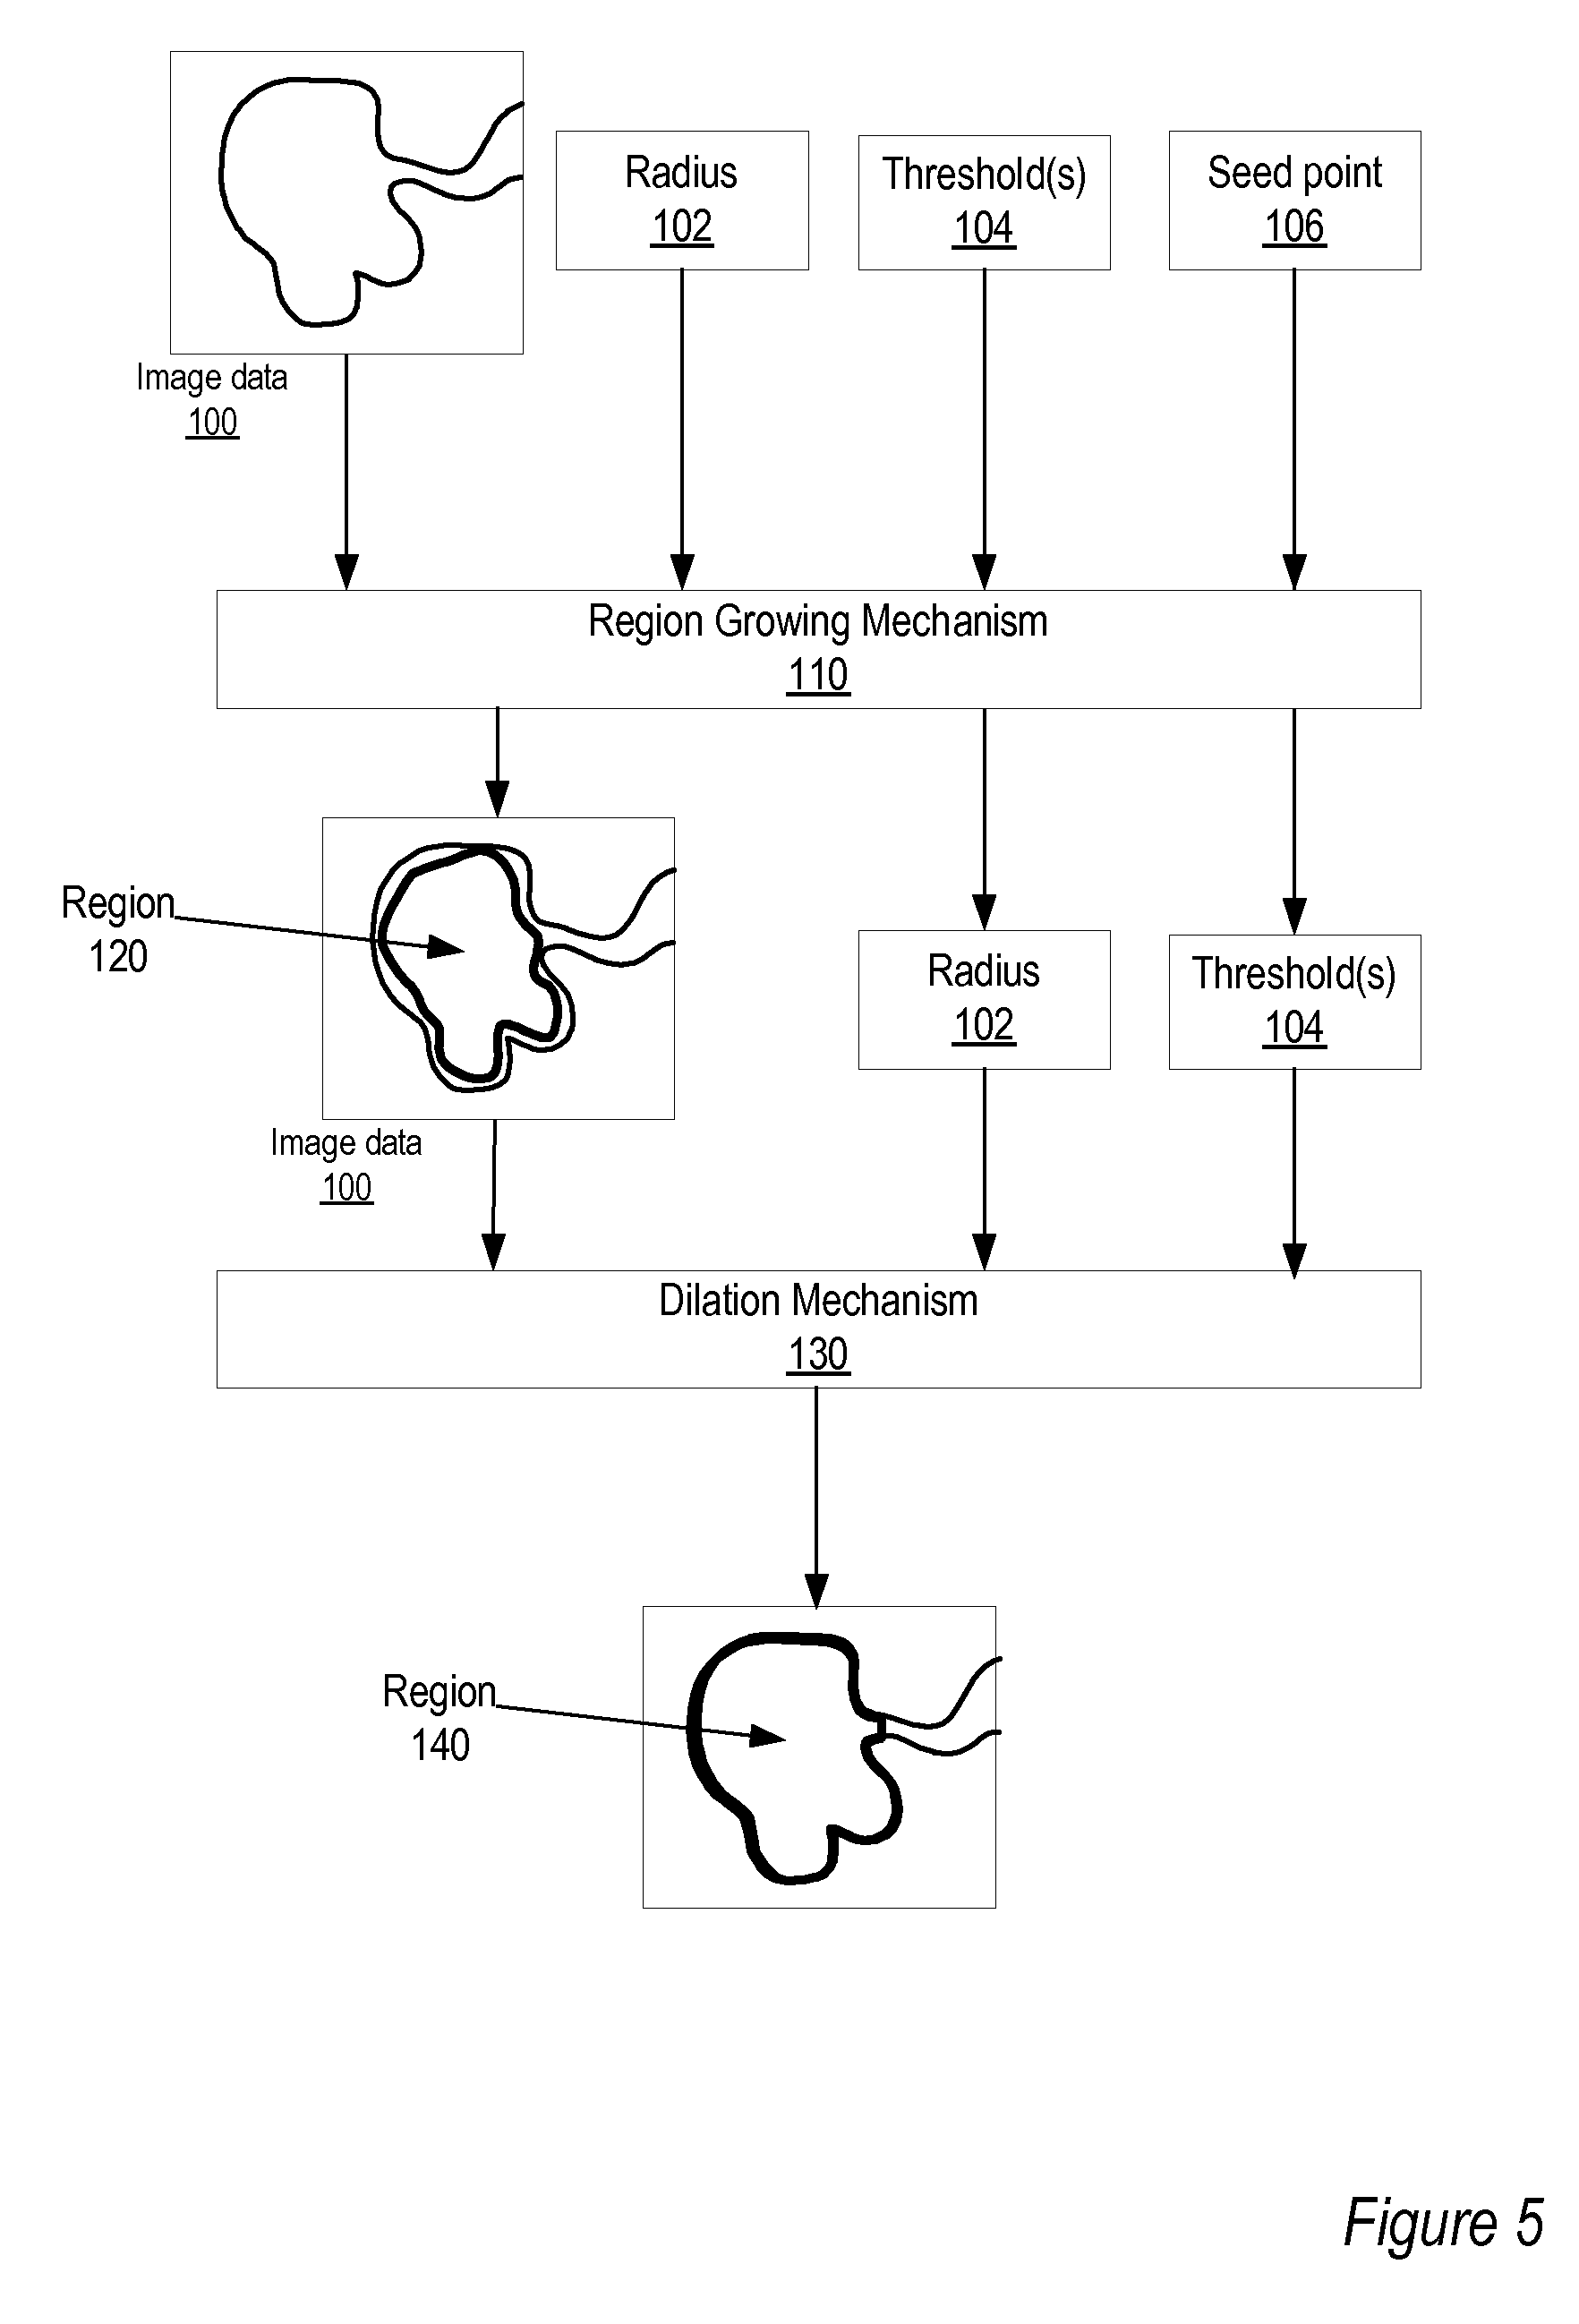 Method and Apparatus for Segmenting Images